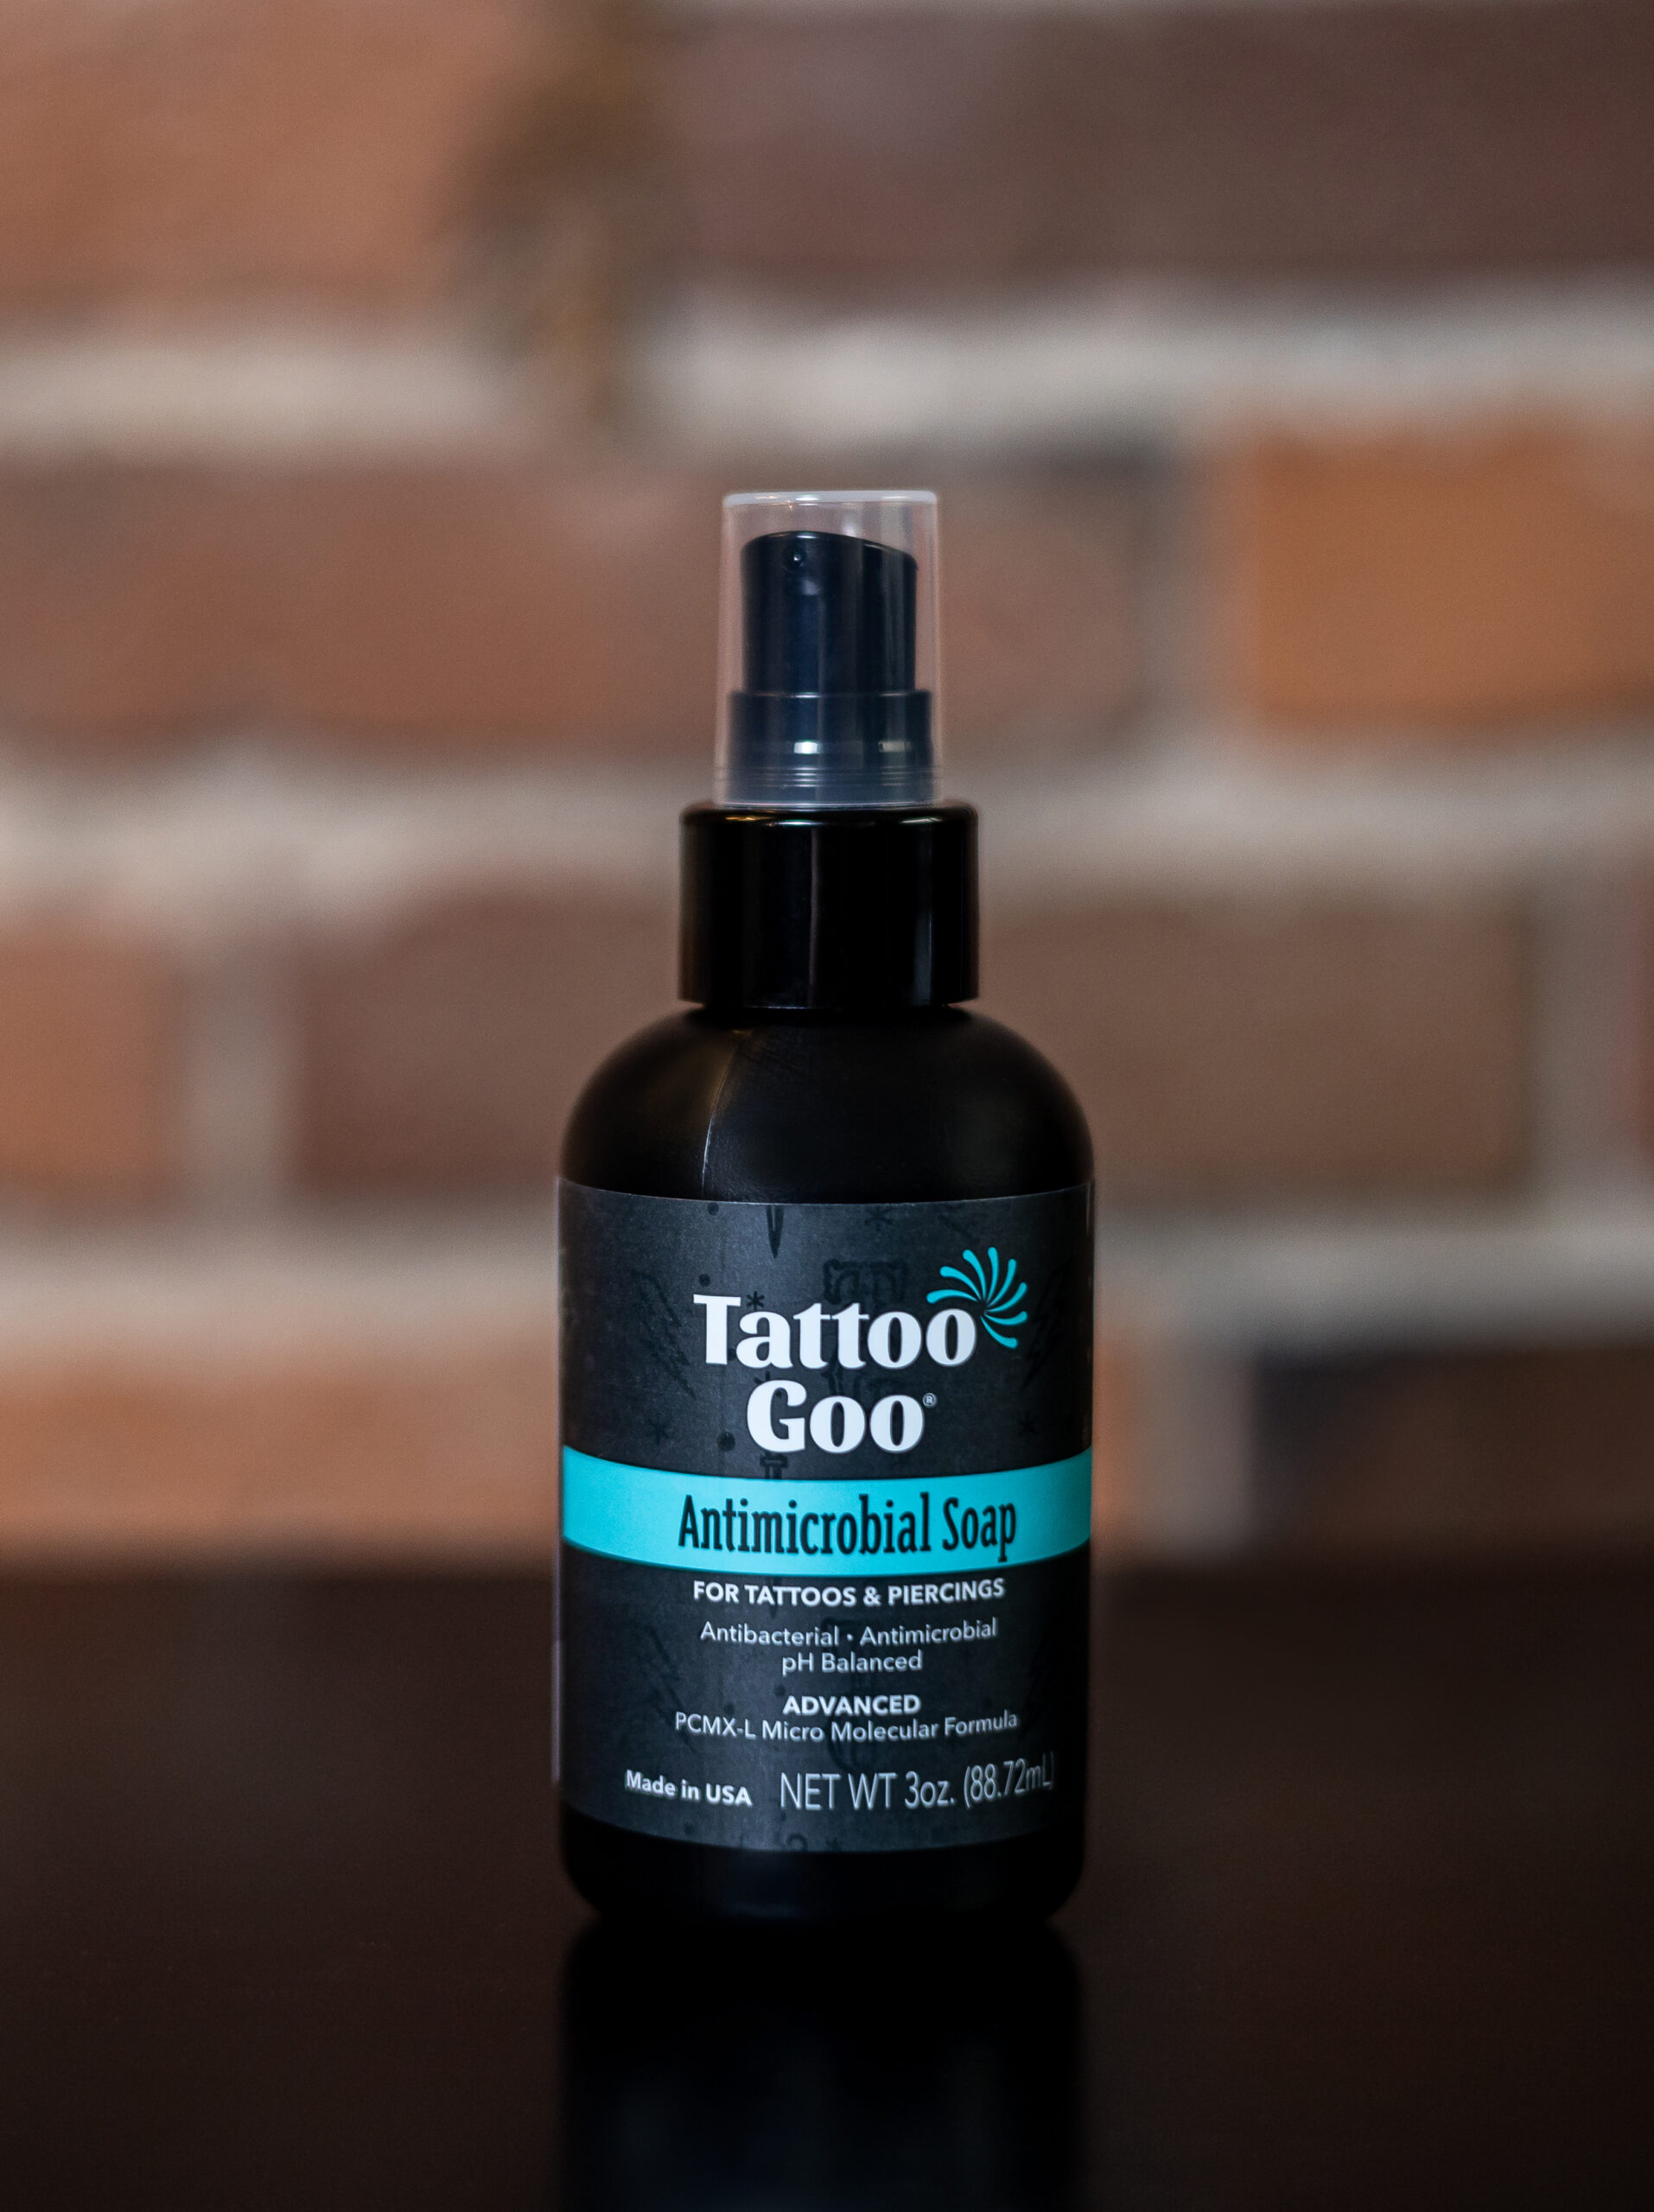 Can You Use Baby Lotion On a New Tattoo? - Saved Tattoo